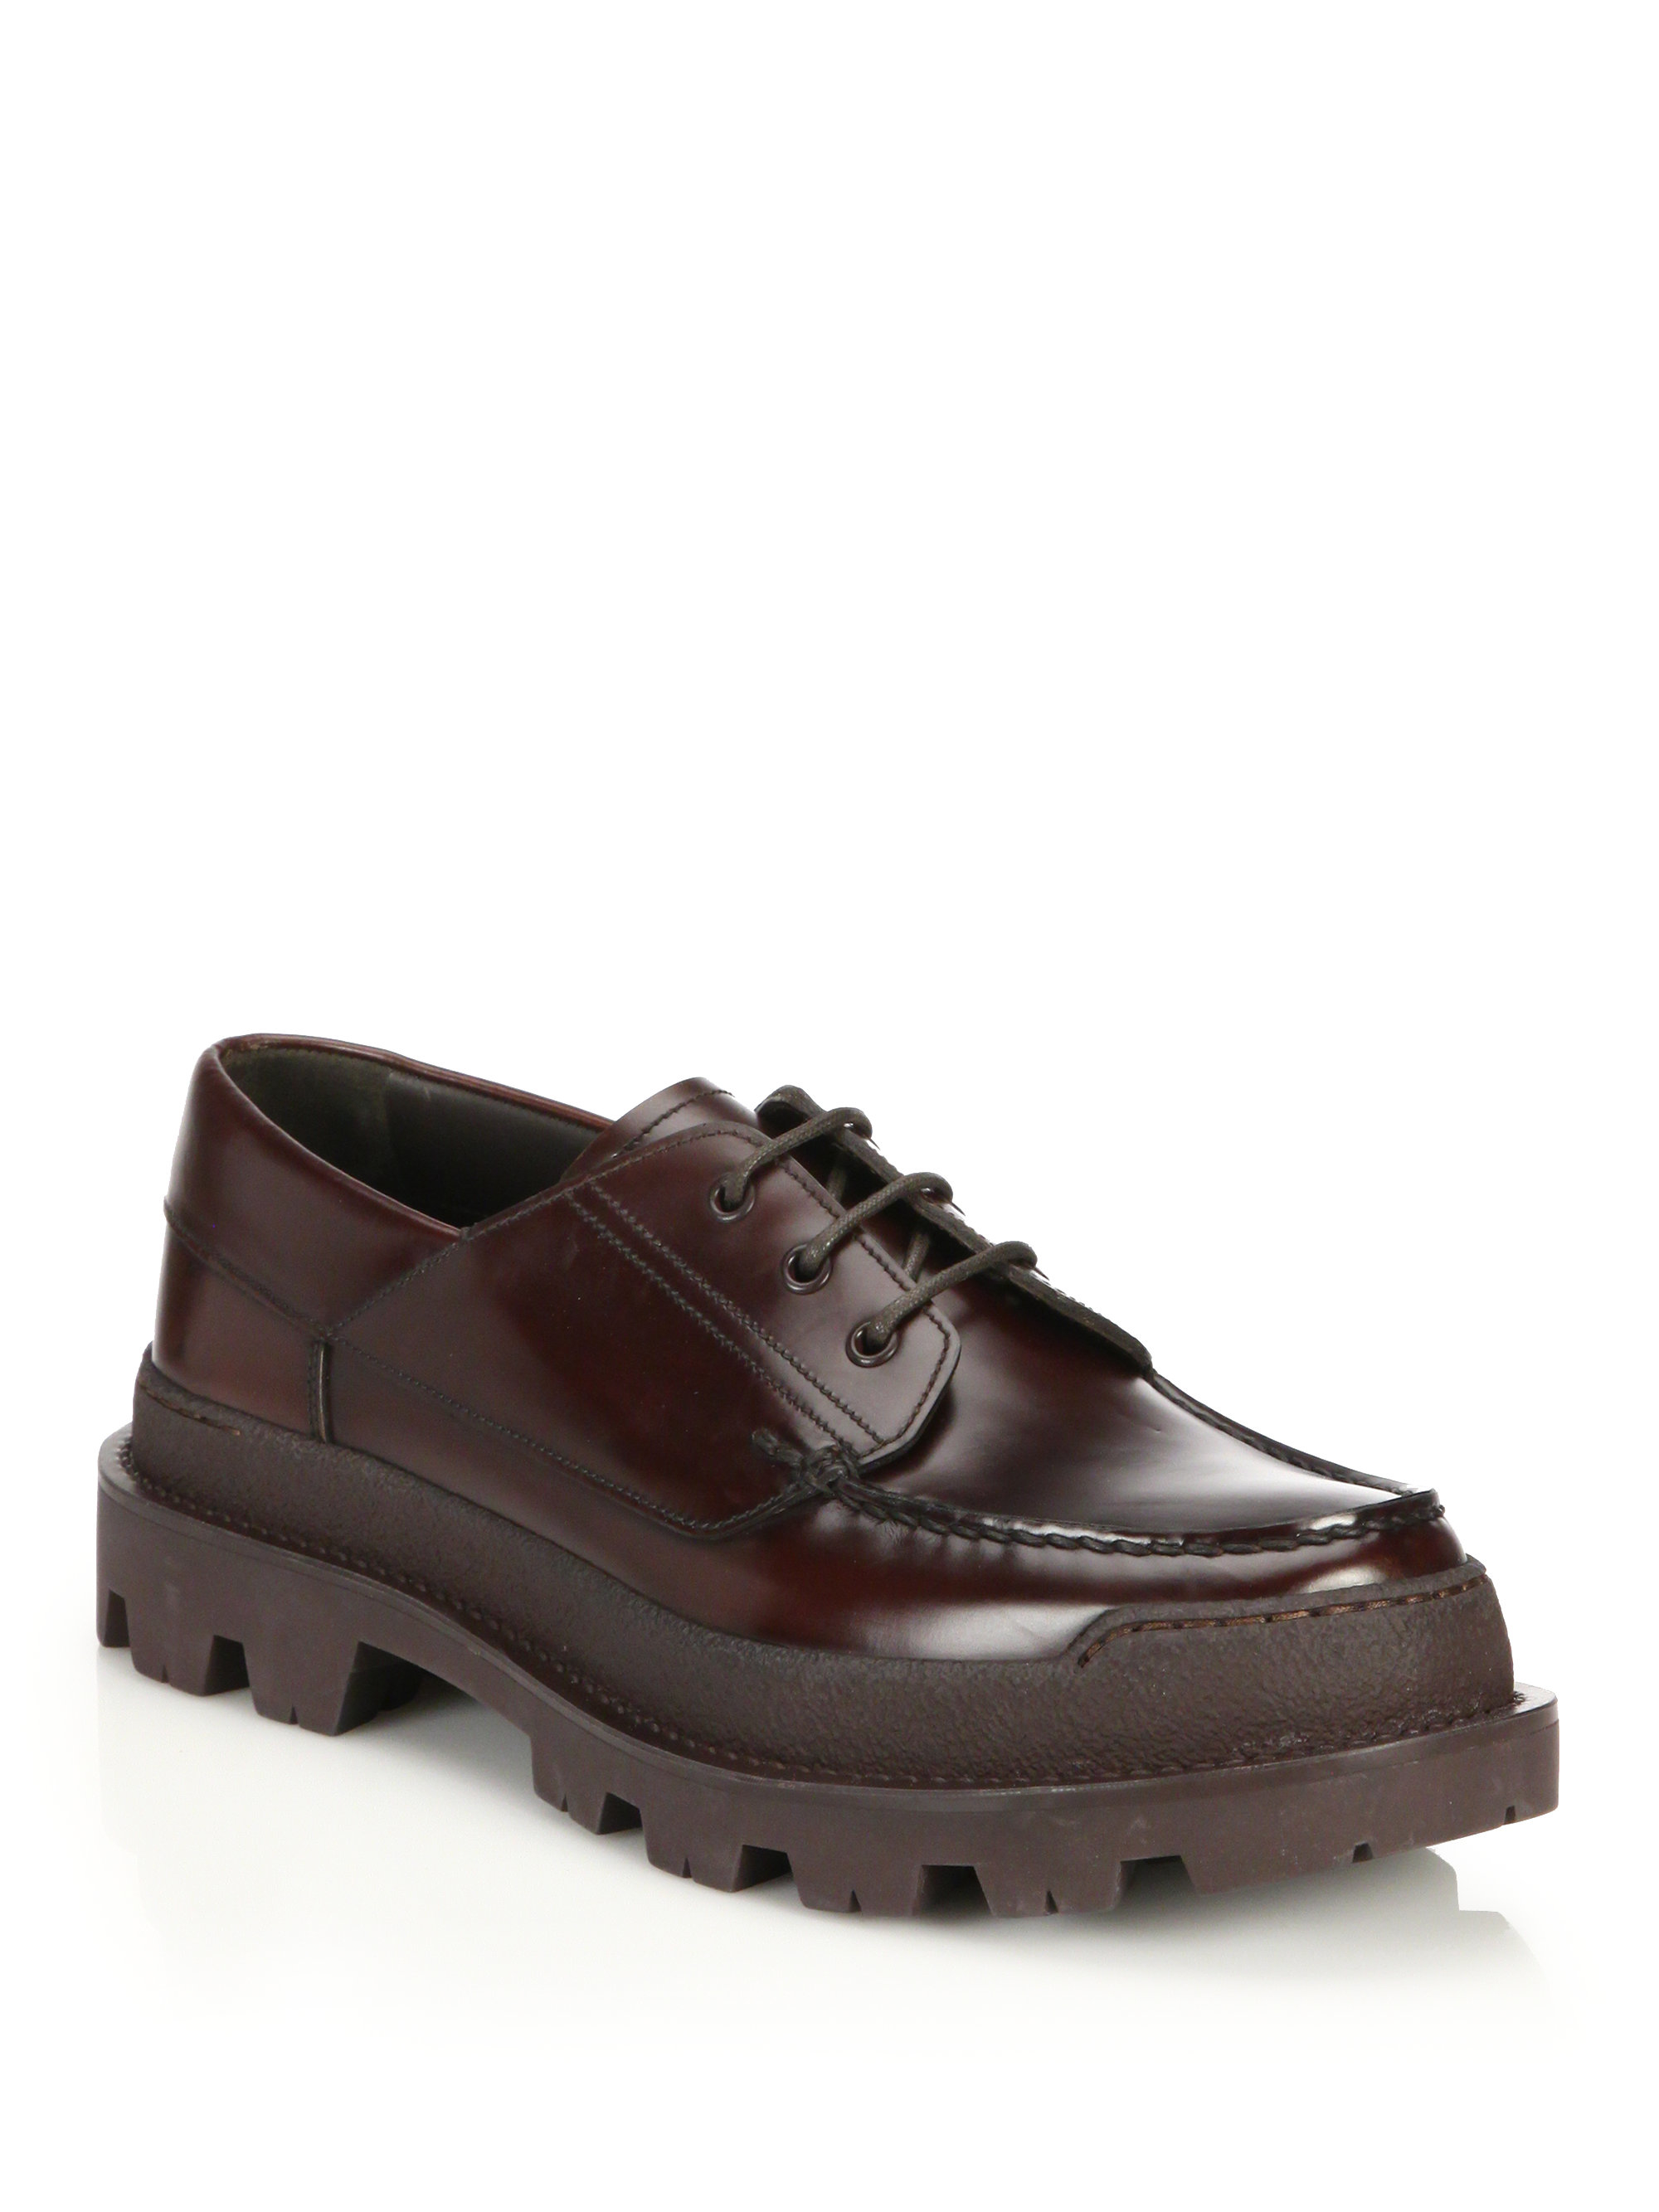 Prada Rois Lug Sole Spazzolato Leather Derby Shoes in Brown for Men | Lyst